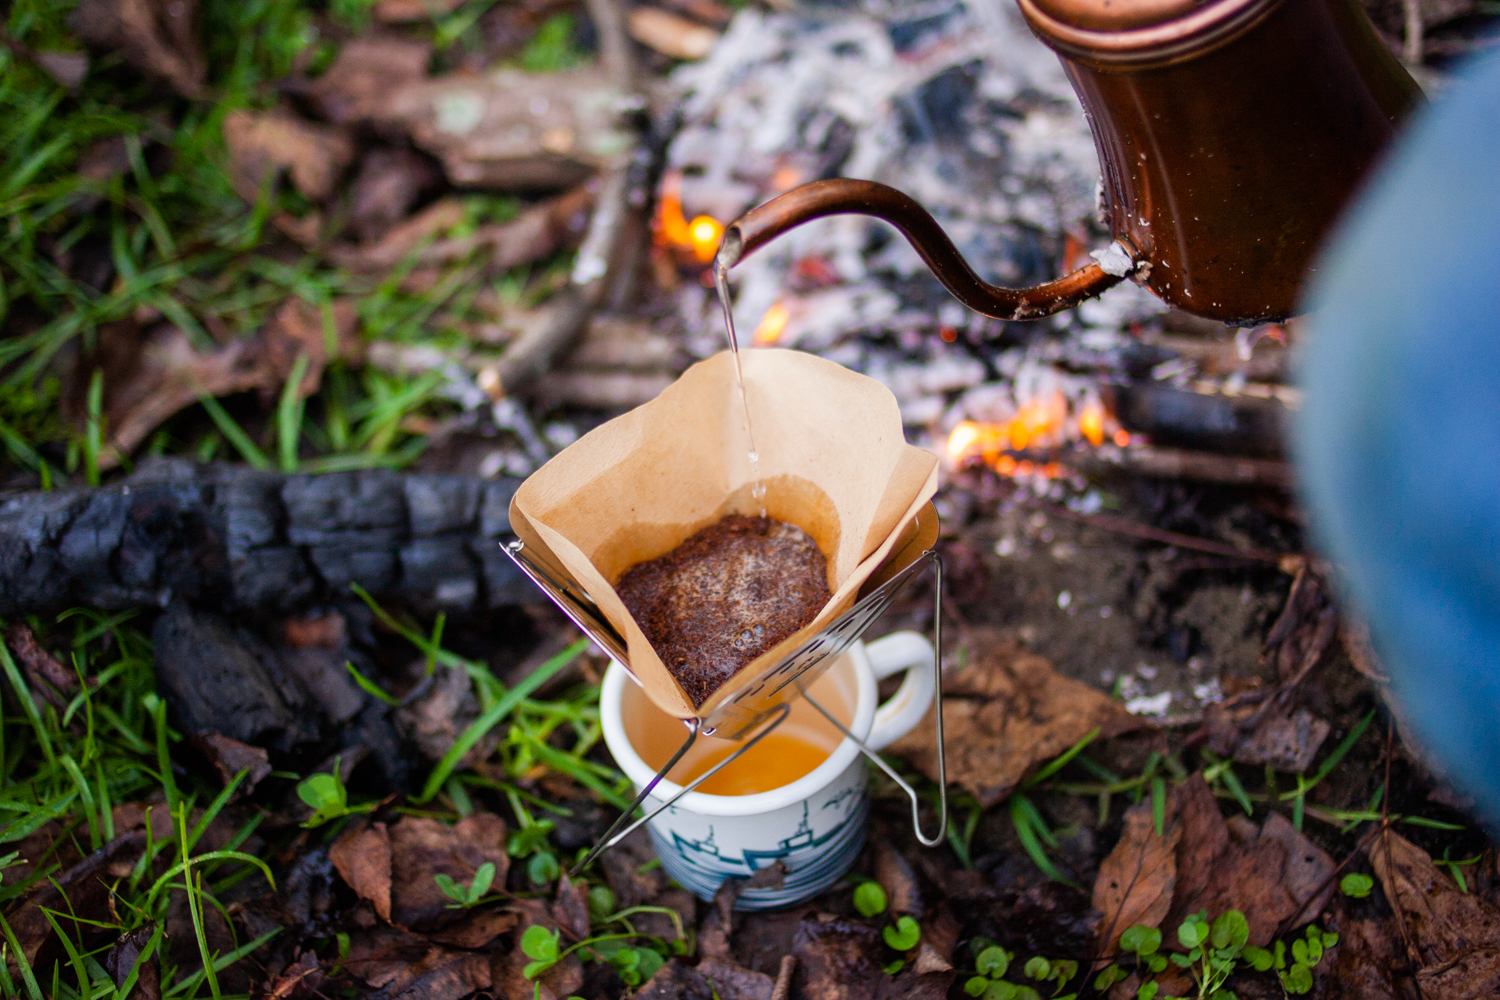 A step-by-step guide on various methods and techniques to brew coffee while camping or hiking in the wilderness. Covers equipment, ingredients and recipes for making great wilderness coffee.